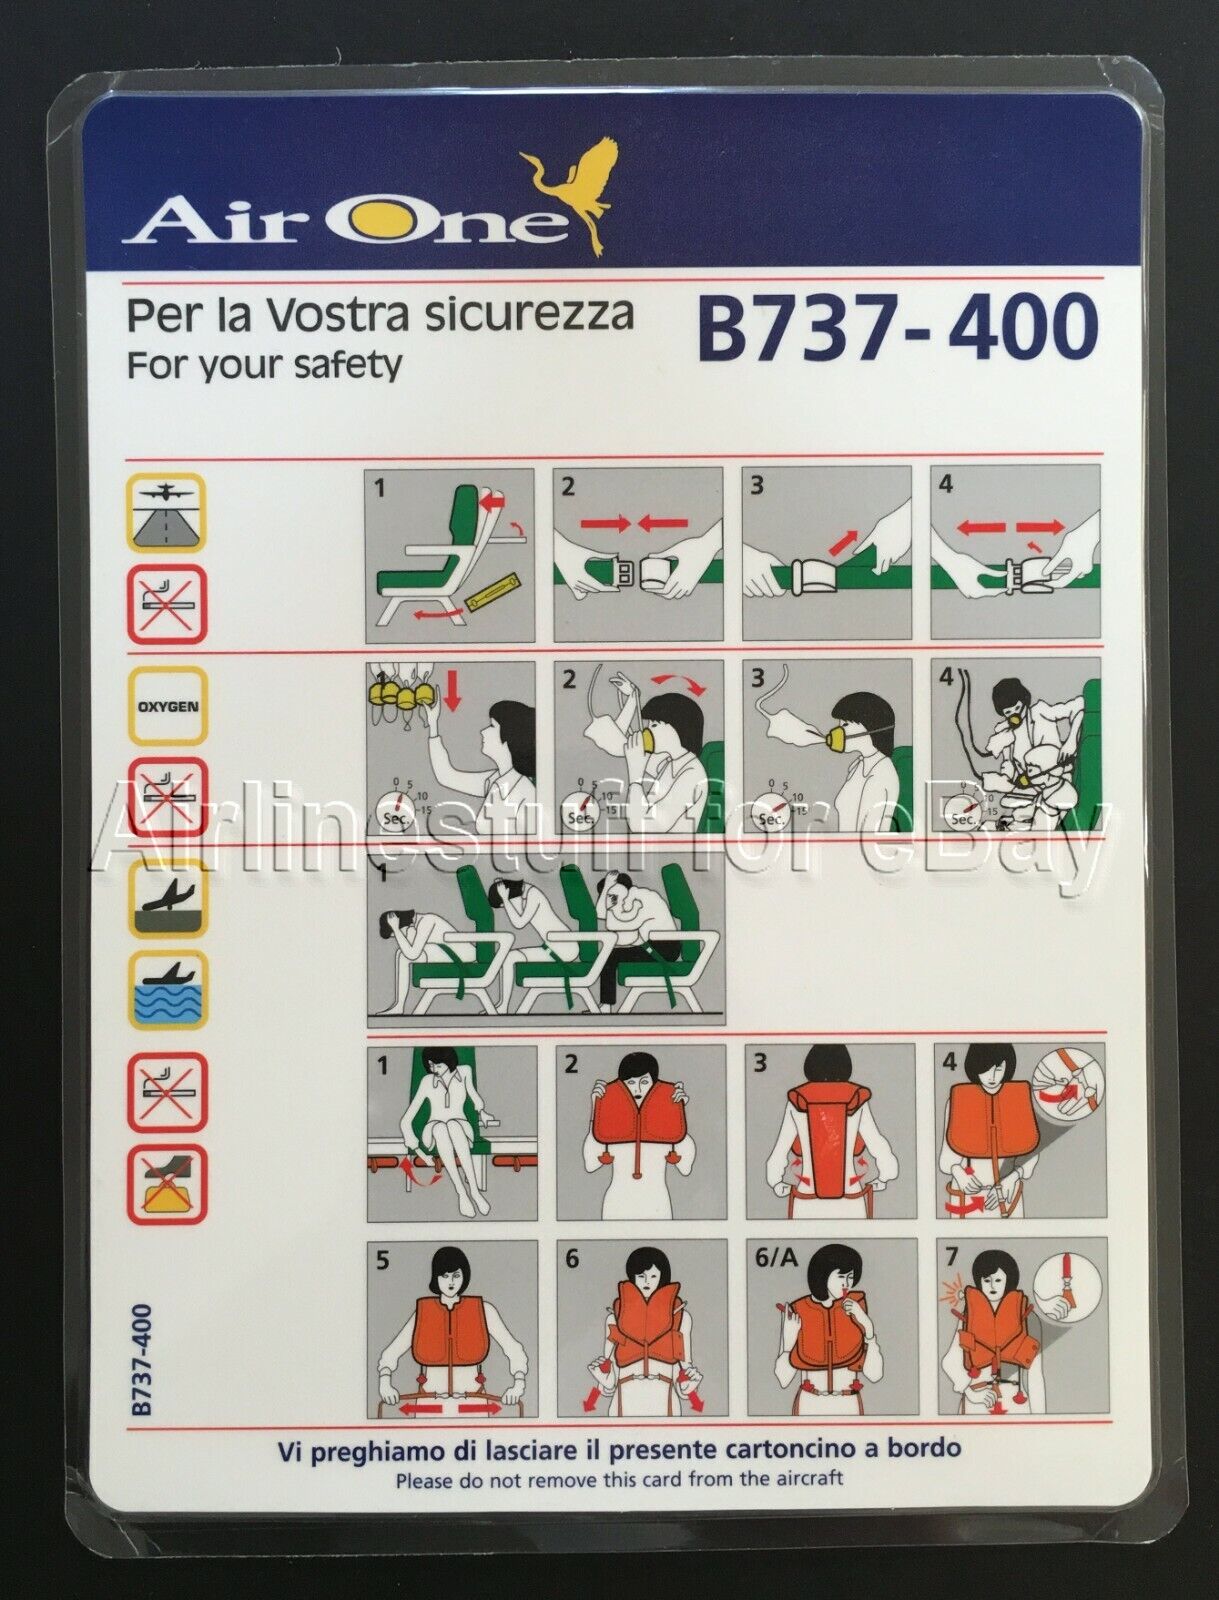 1997-2011 AIR ONE Boeing 737-400 SAFETY CARD airlines airways ITALY